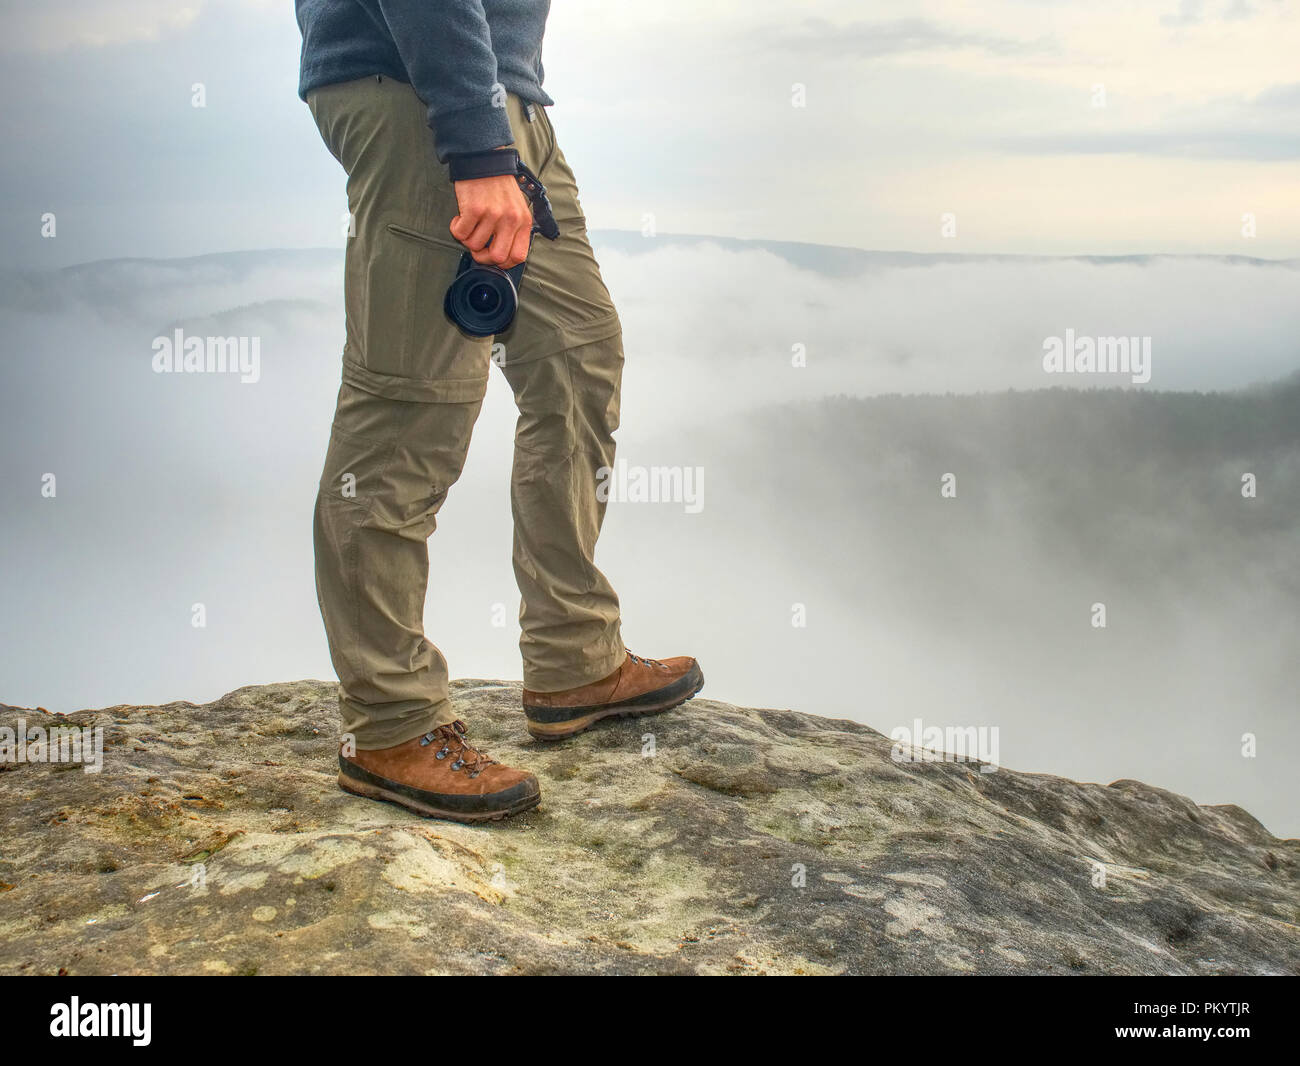 Photographer hand with  camera,  legs, knees and boots. Man takes landscape photos on peak of rock. Dreamy fall  landscape Sun colorized horizon Stock Photo